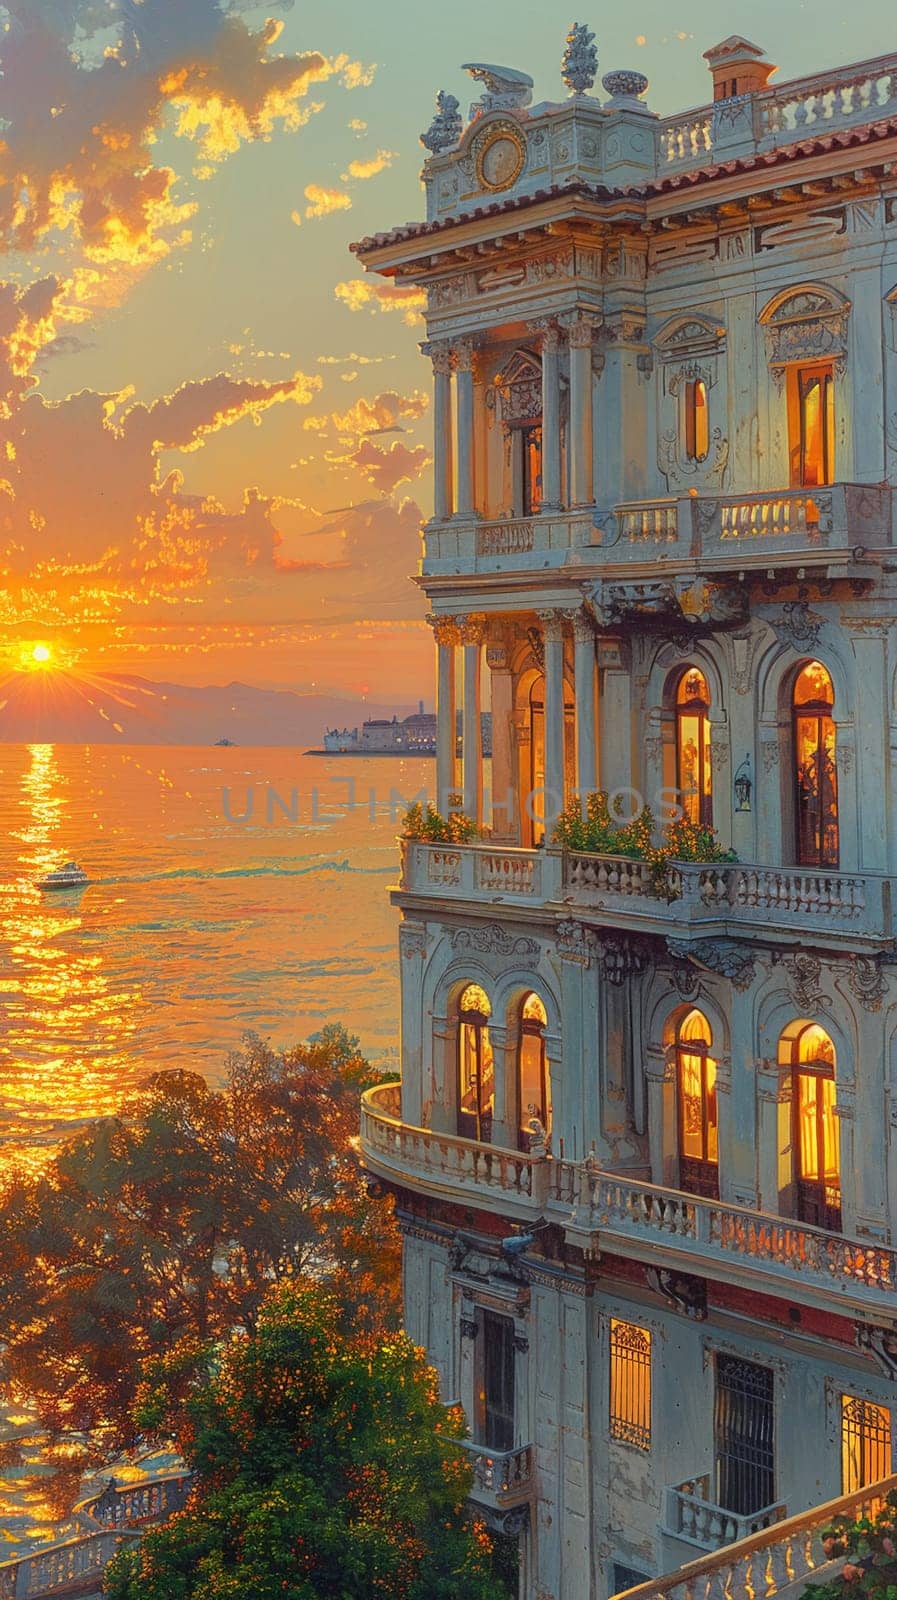 Golden hour's soft light against old-world architecture, painted with a gentle realism and attention to detail.